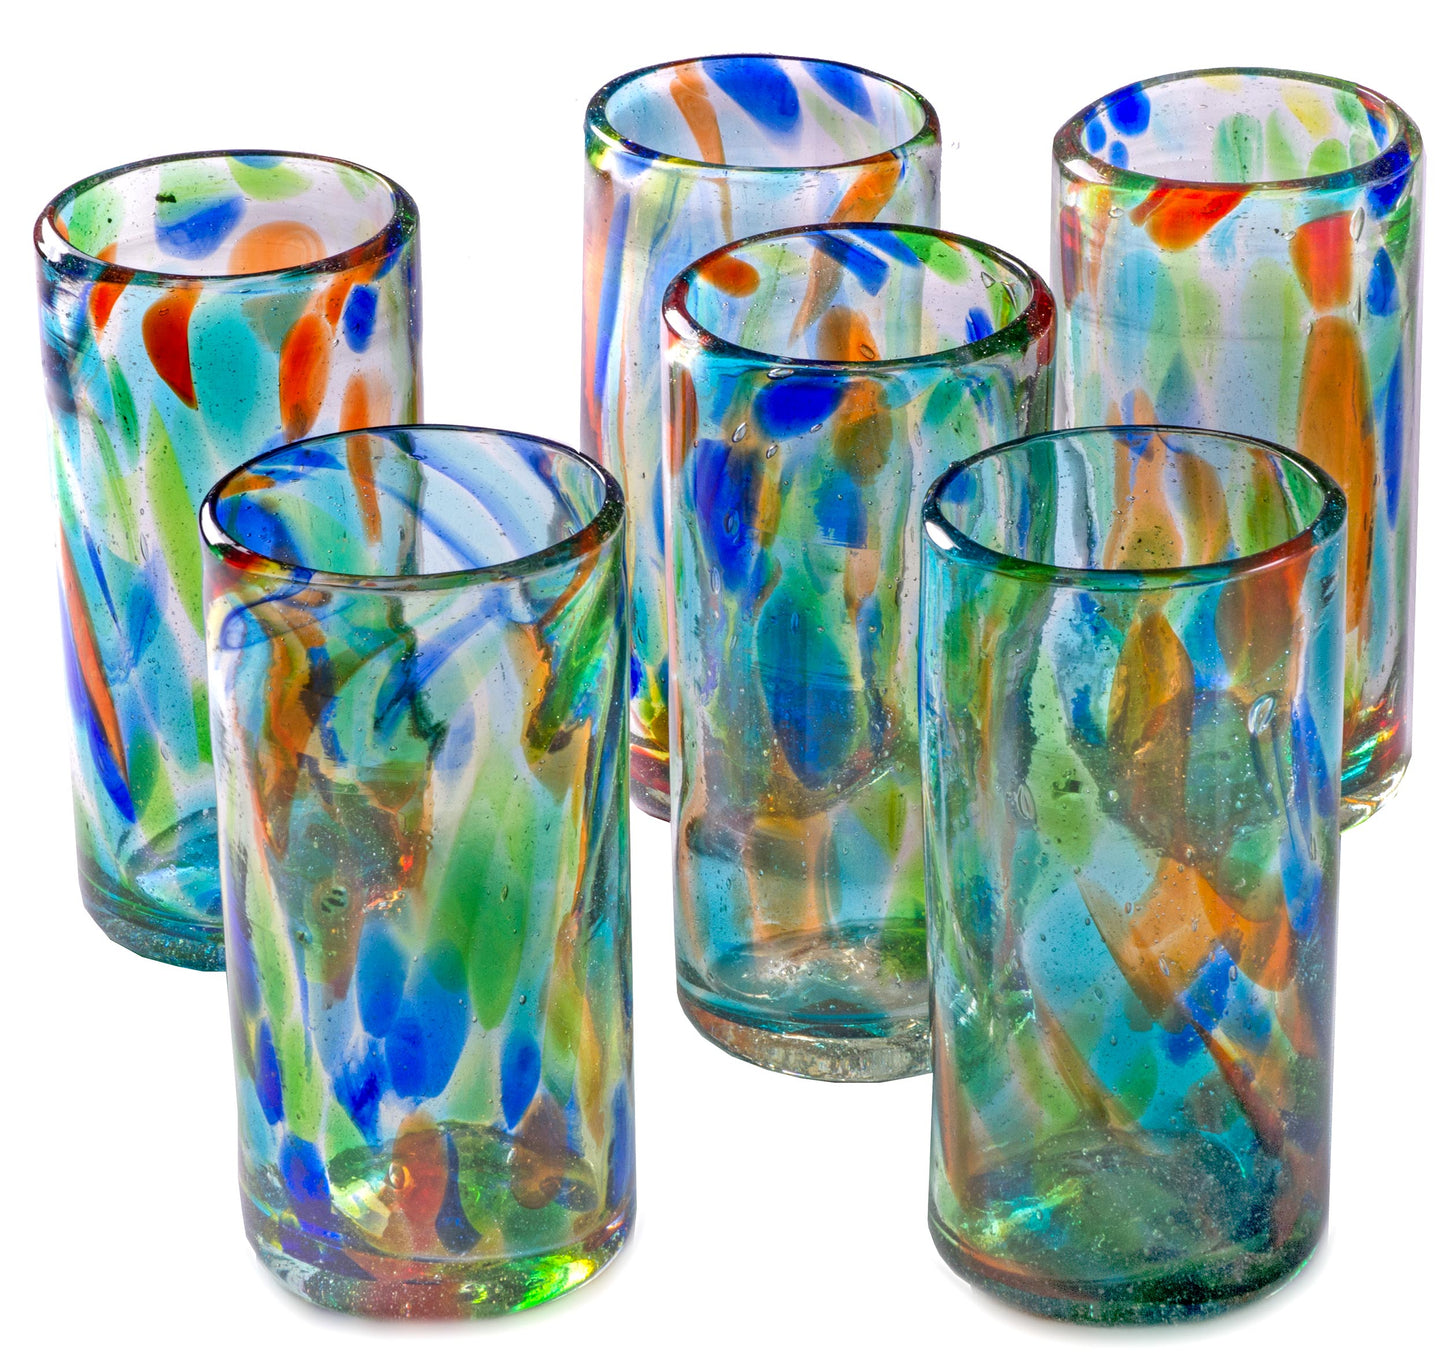 Solid Confetti Tall Tumbler - 22 oz - Set of 6 - Orion's Table 